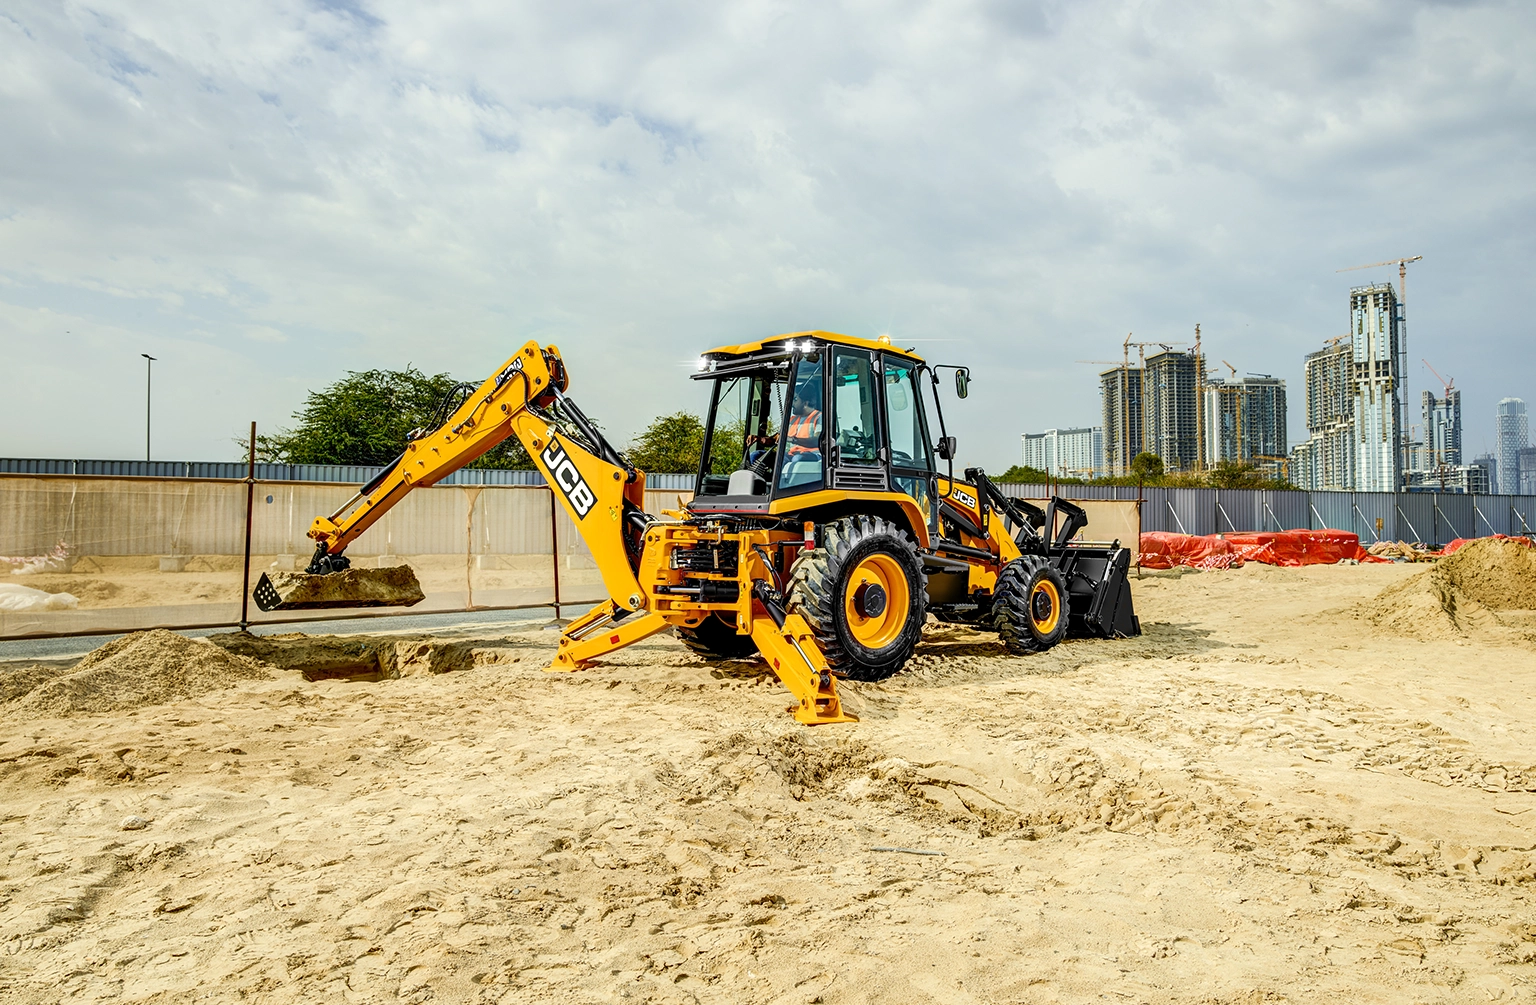 JCB - Loading, Roading And Excavating